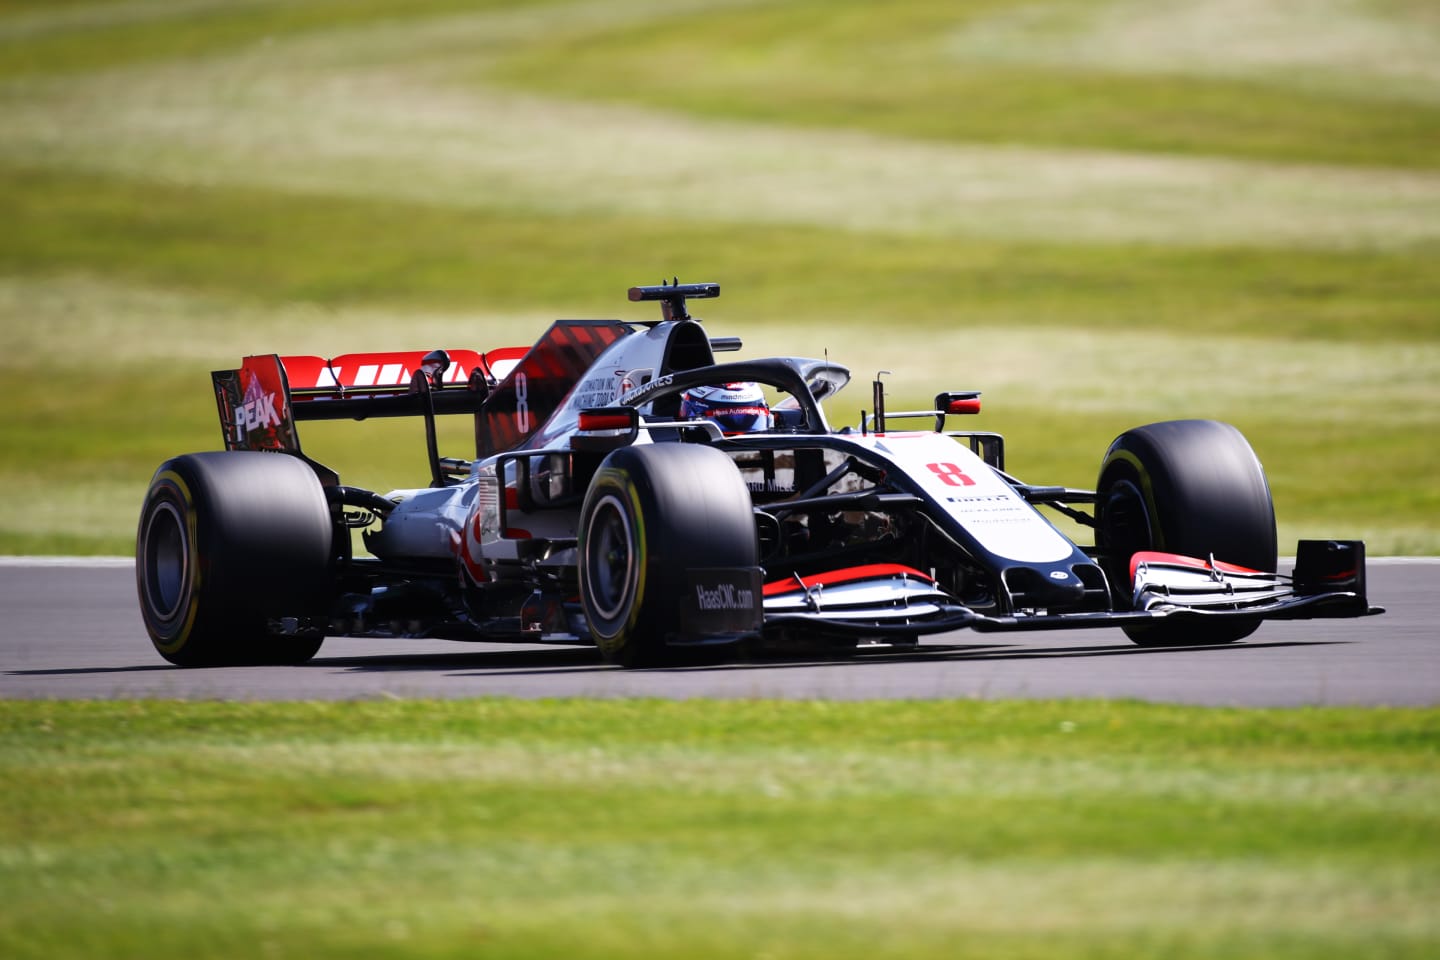 NORTHAMPTON, ENGLAND - JULY 31: Romain Grosjean of France driving the (8) Haas F1 Team VF-20 Ferrari on track during practice for the F1 Grand Prix of Great Britain at Silverstone on July 31, 2020 in Northampton, England. (Photo by Bryn Lennon/Getty Images)